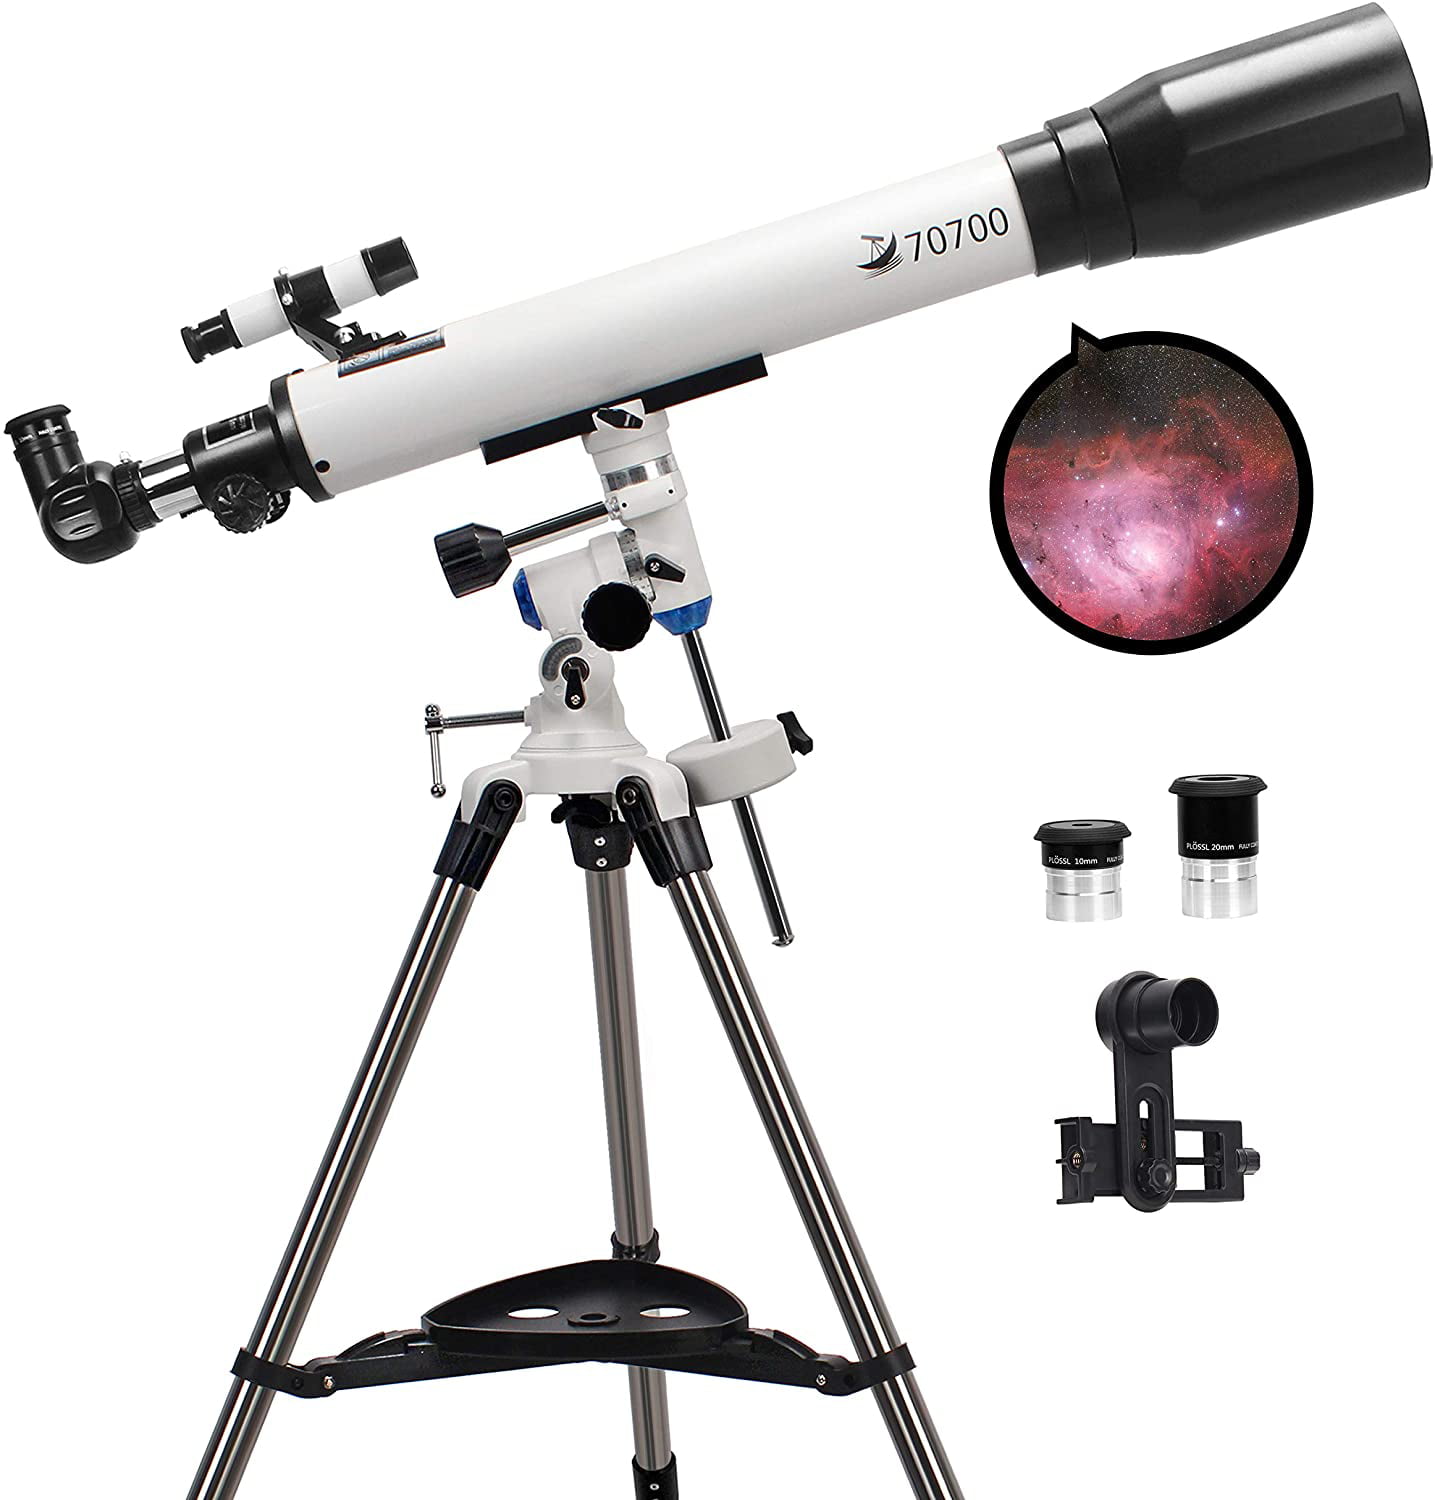 Astronomical Refracting Telescope Travel Telescope Gifts Kanzd Astronomy Telescope for Kids Adults Beginners 150X 70mm Aperture Telescope with Tripod Finder 